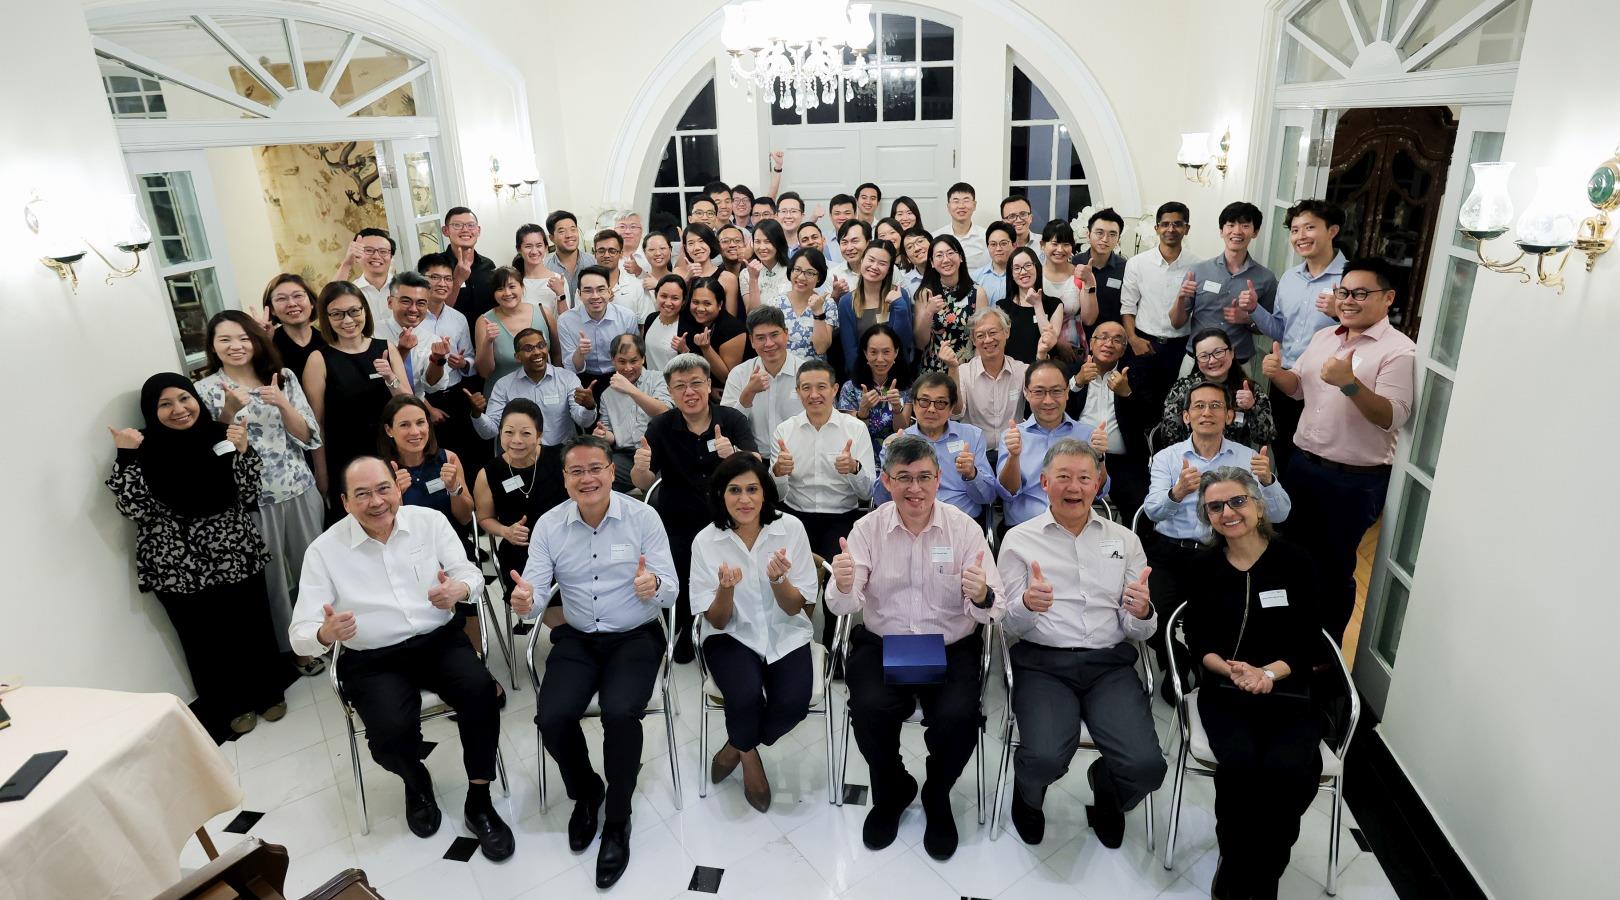 Attendees of the 11th Duke-NUS Dialogue pose for a group photo // Wilson Pang, Pixel.i Photography